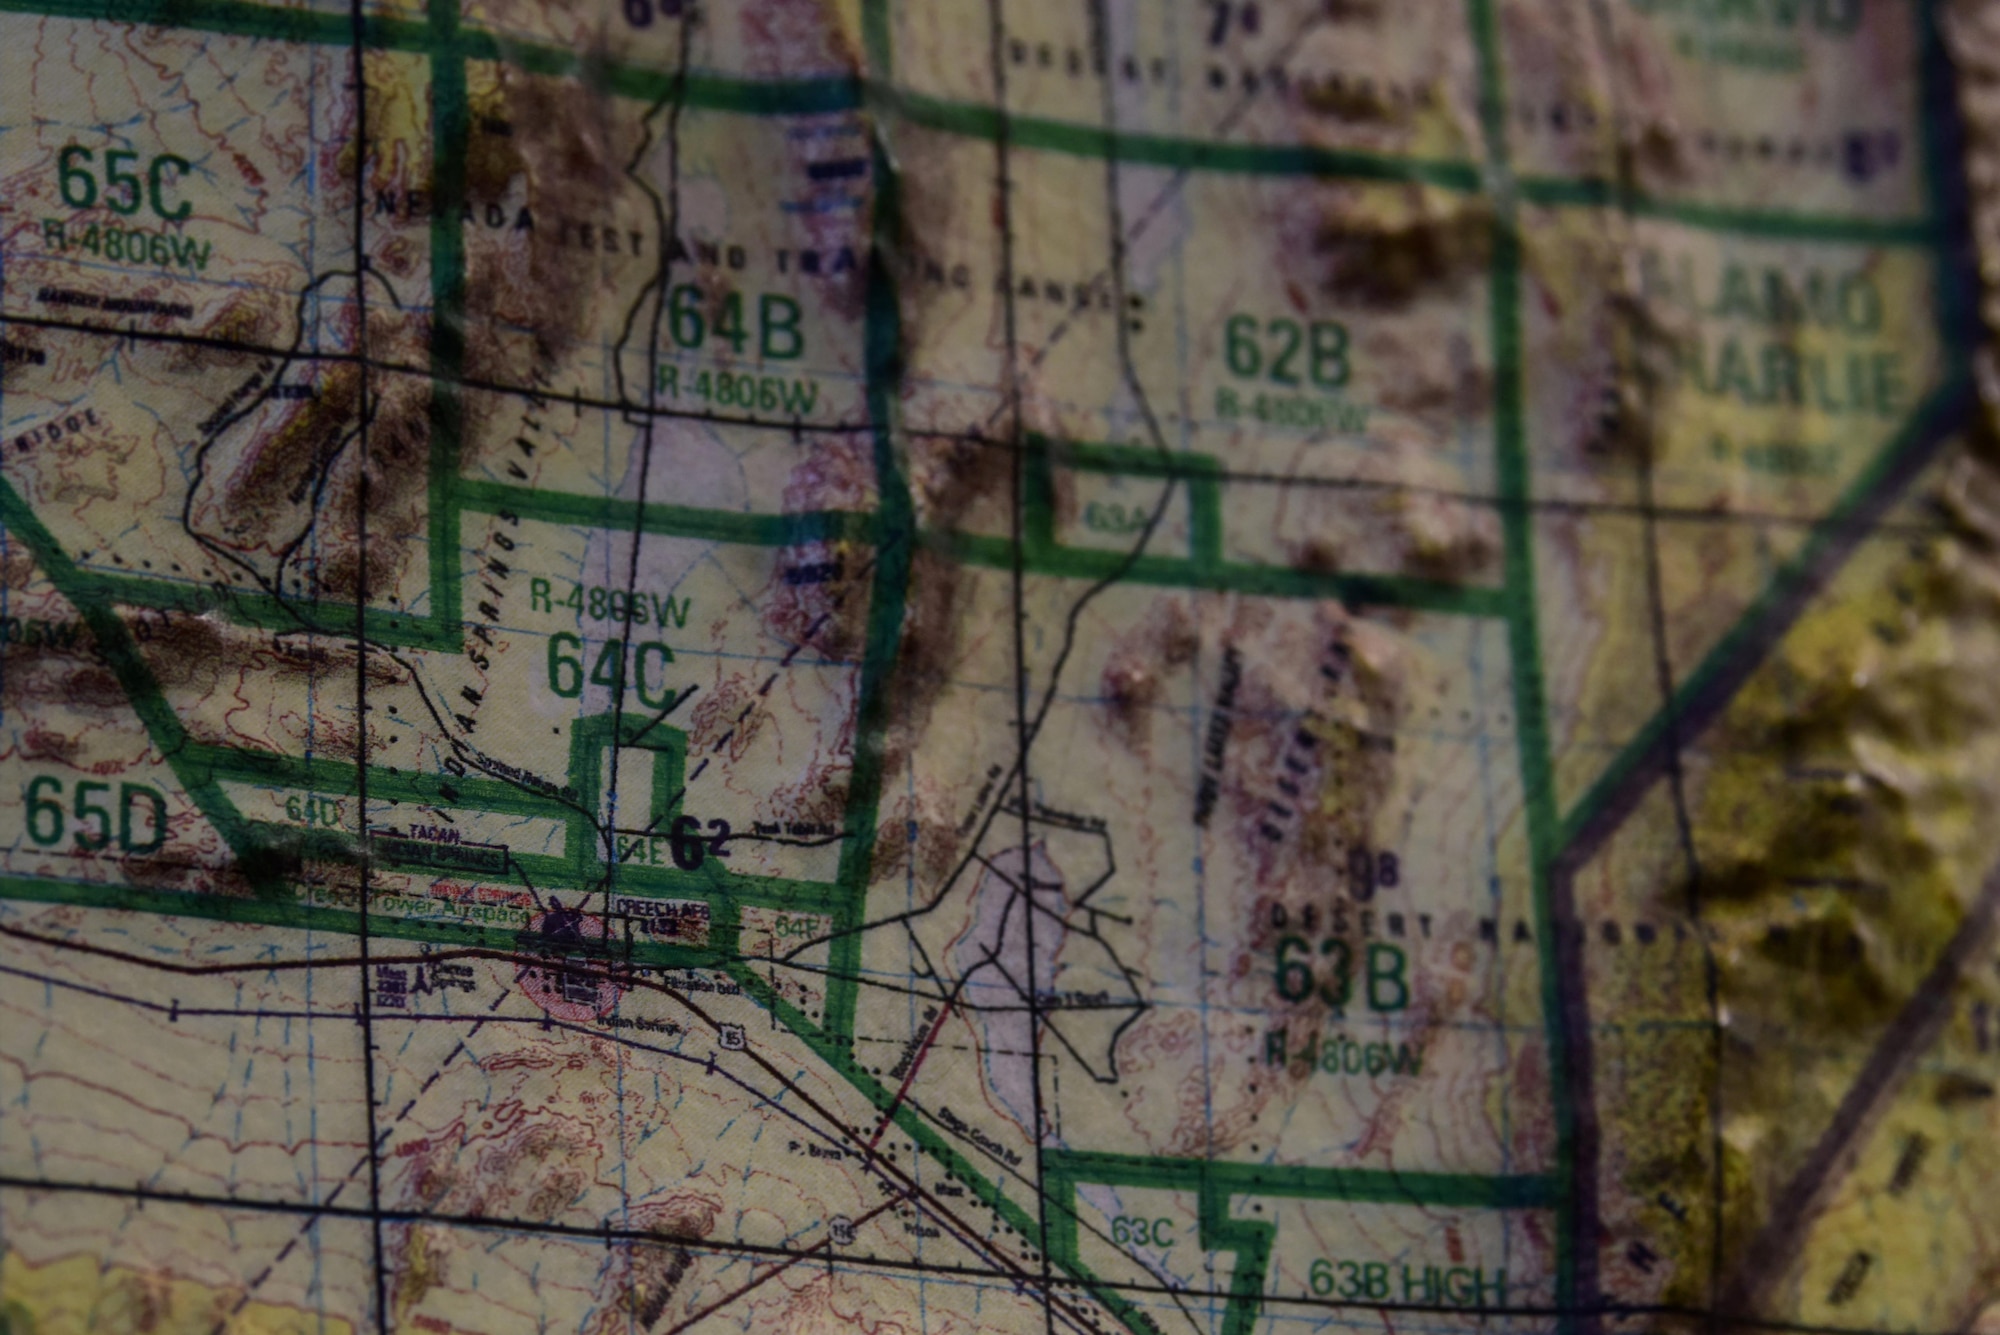 Creech Air Force Base, the home of the Hunters and the MQ-9 Reaper, is displayed on maps in the 66th Rescue Squadron at Nellis Air Force Base, Nevada, July 15, 2019. Before taking to the skies, aircrew will review a map and demonstrate flight paths to identify any areas that need special attention during flight. (U.S. Air Force photo by Senior Airman Haley Stevens)